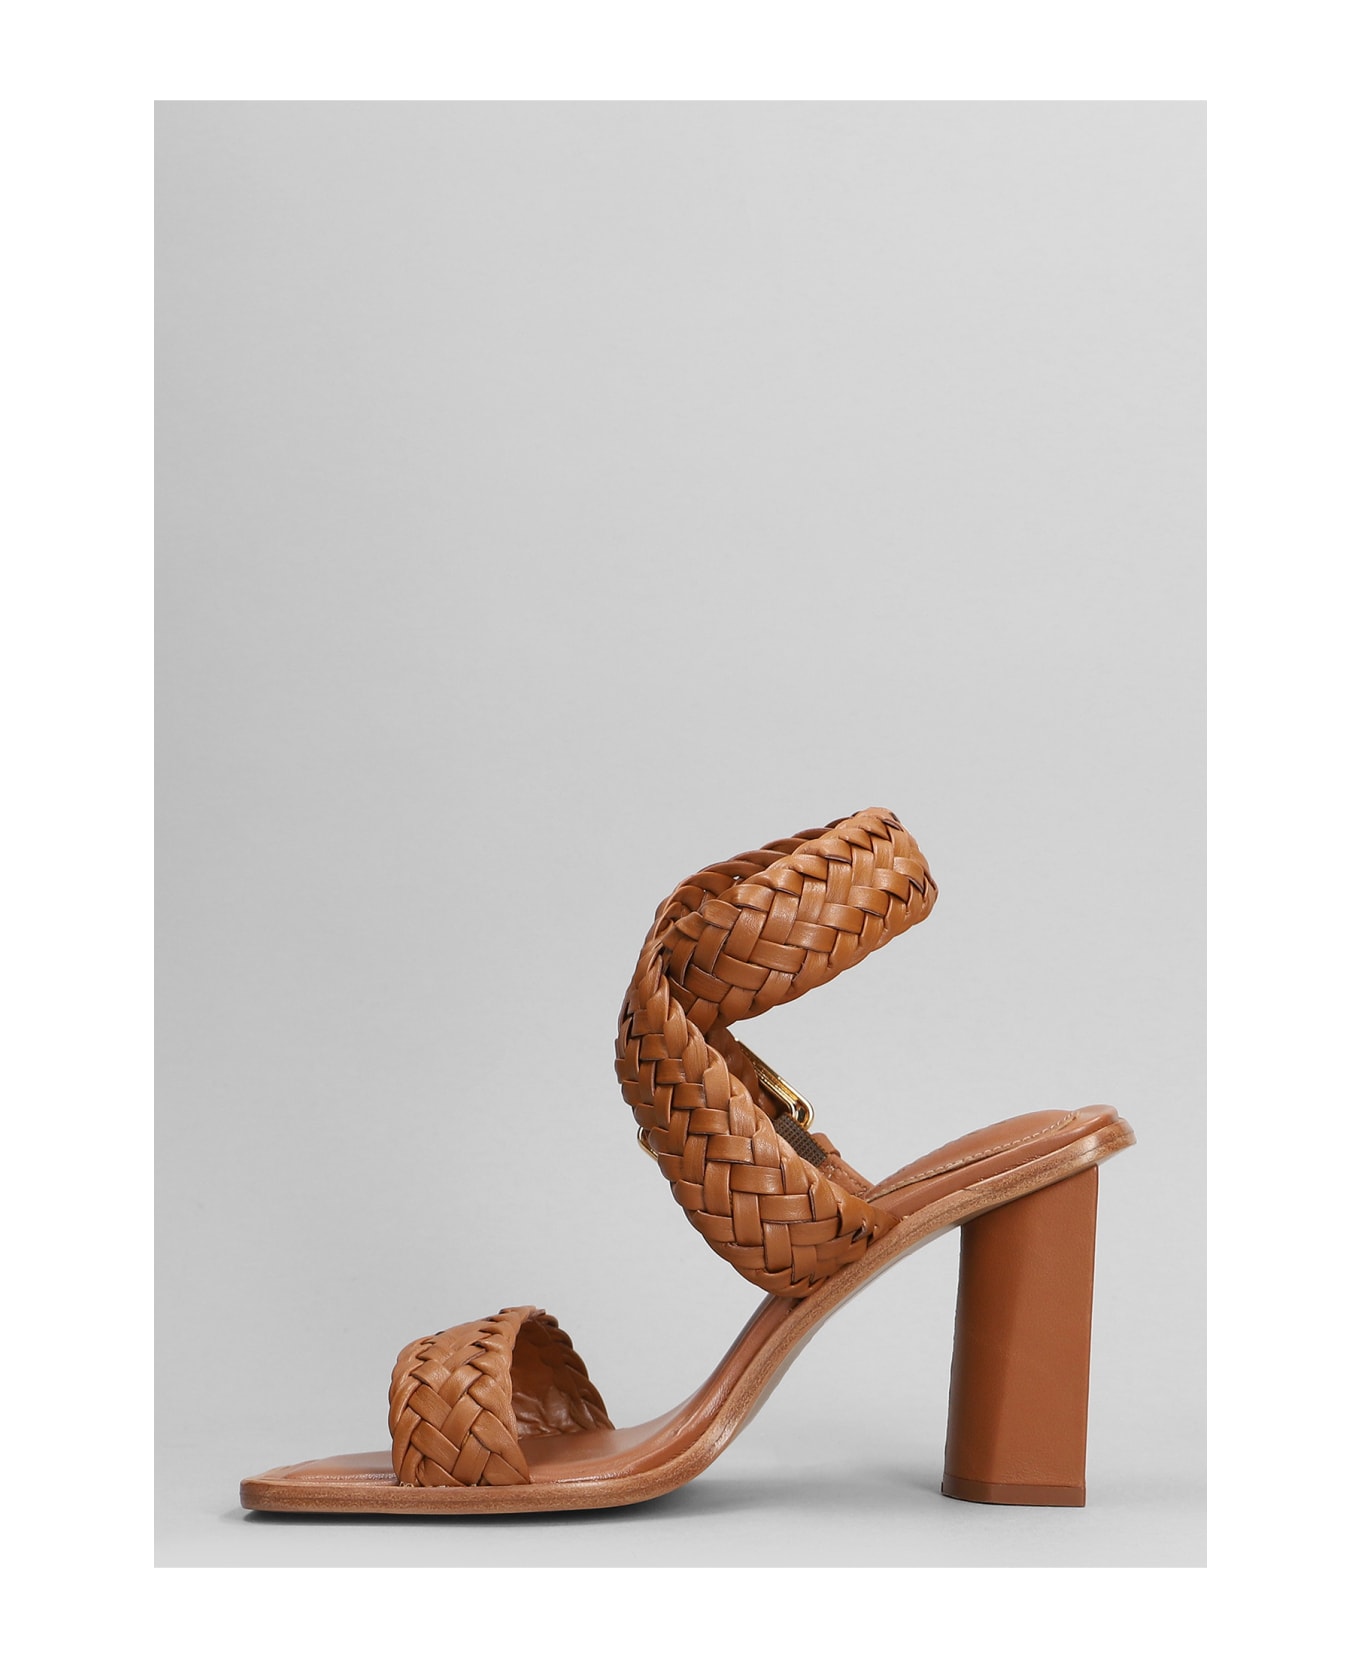 Schutz Sandals In Leather Color Leather - leather color